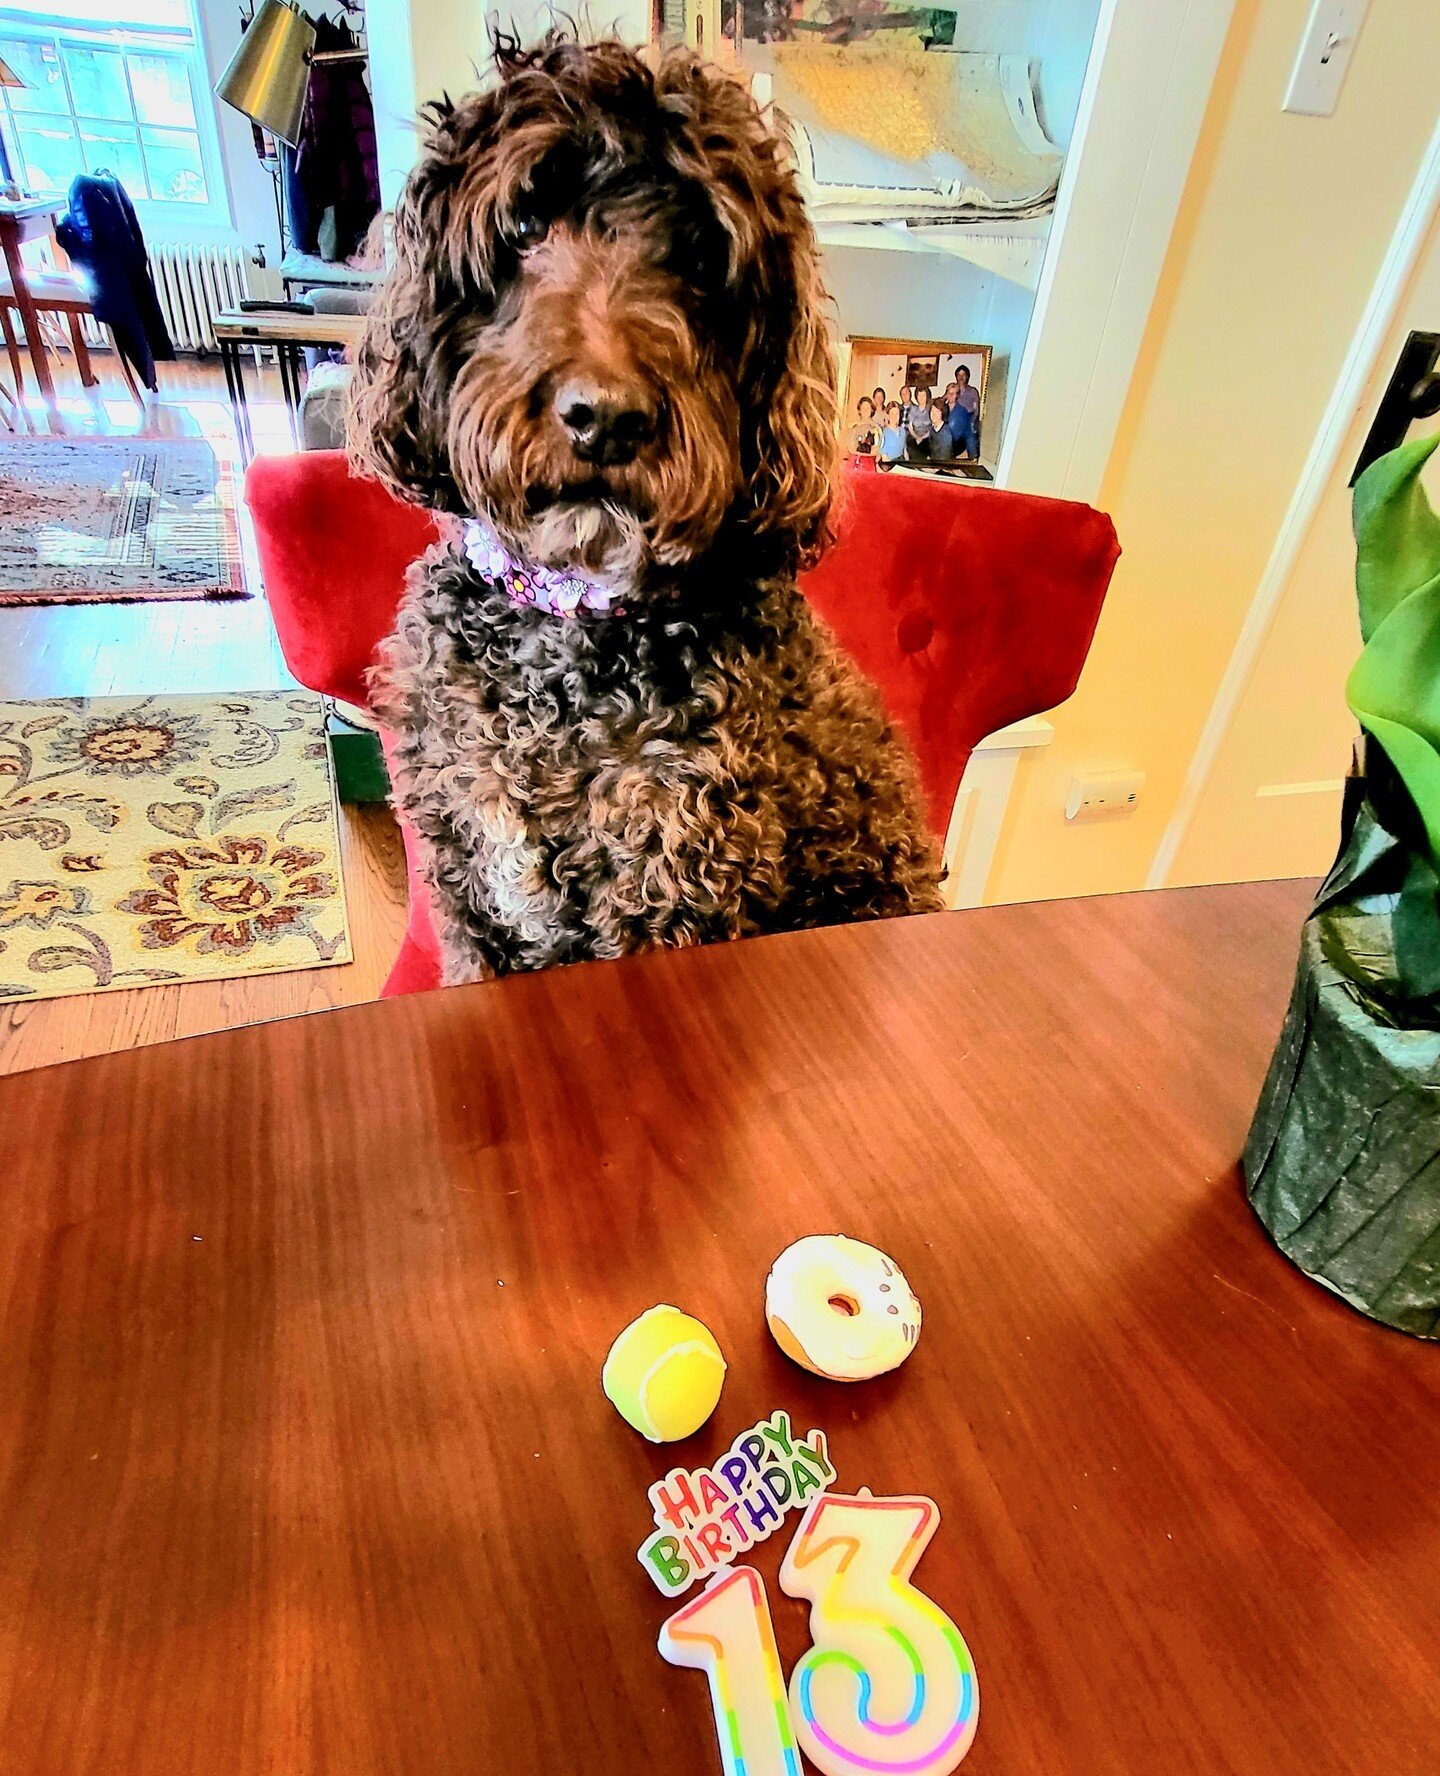 Ramee celebrated 13 this year! What a good girl she is. She is now a city dog and frequents the Pearl district in Portland. ⁠
⁠
⁠
⁠
⁠
⁠
⁠
⁠
#greatdaylabradoodles⁠
#labradoodlepuppies⁠
#lolcanine⁠
#australianlabradoodle⁠
#labradoodles⁠
#merlelabradood